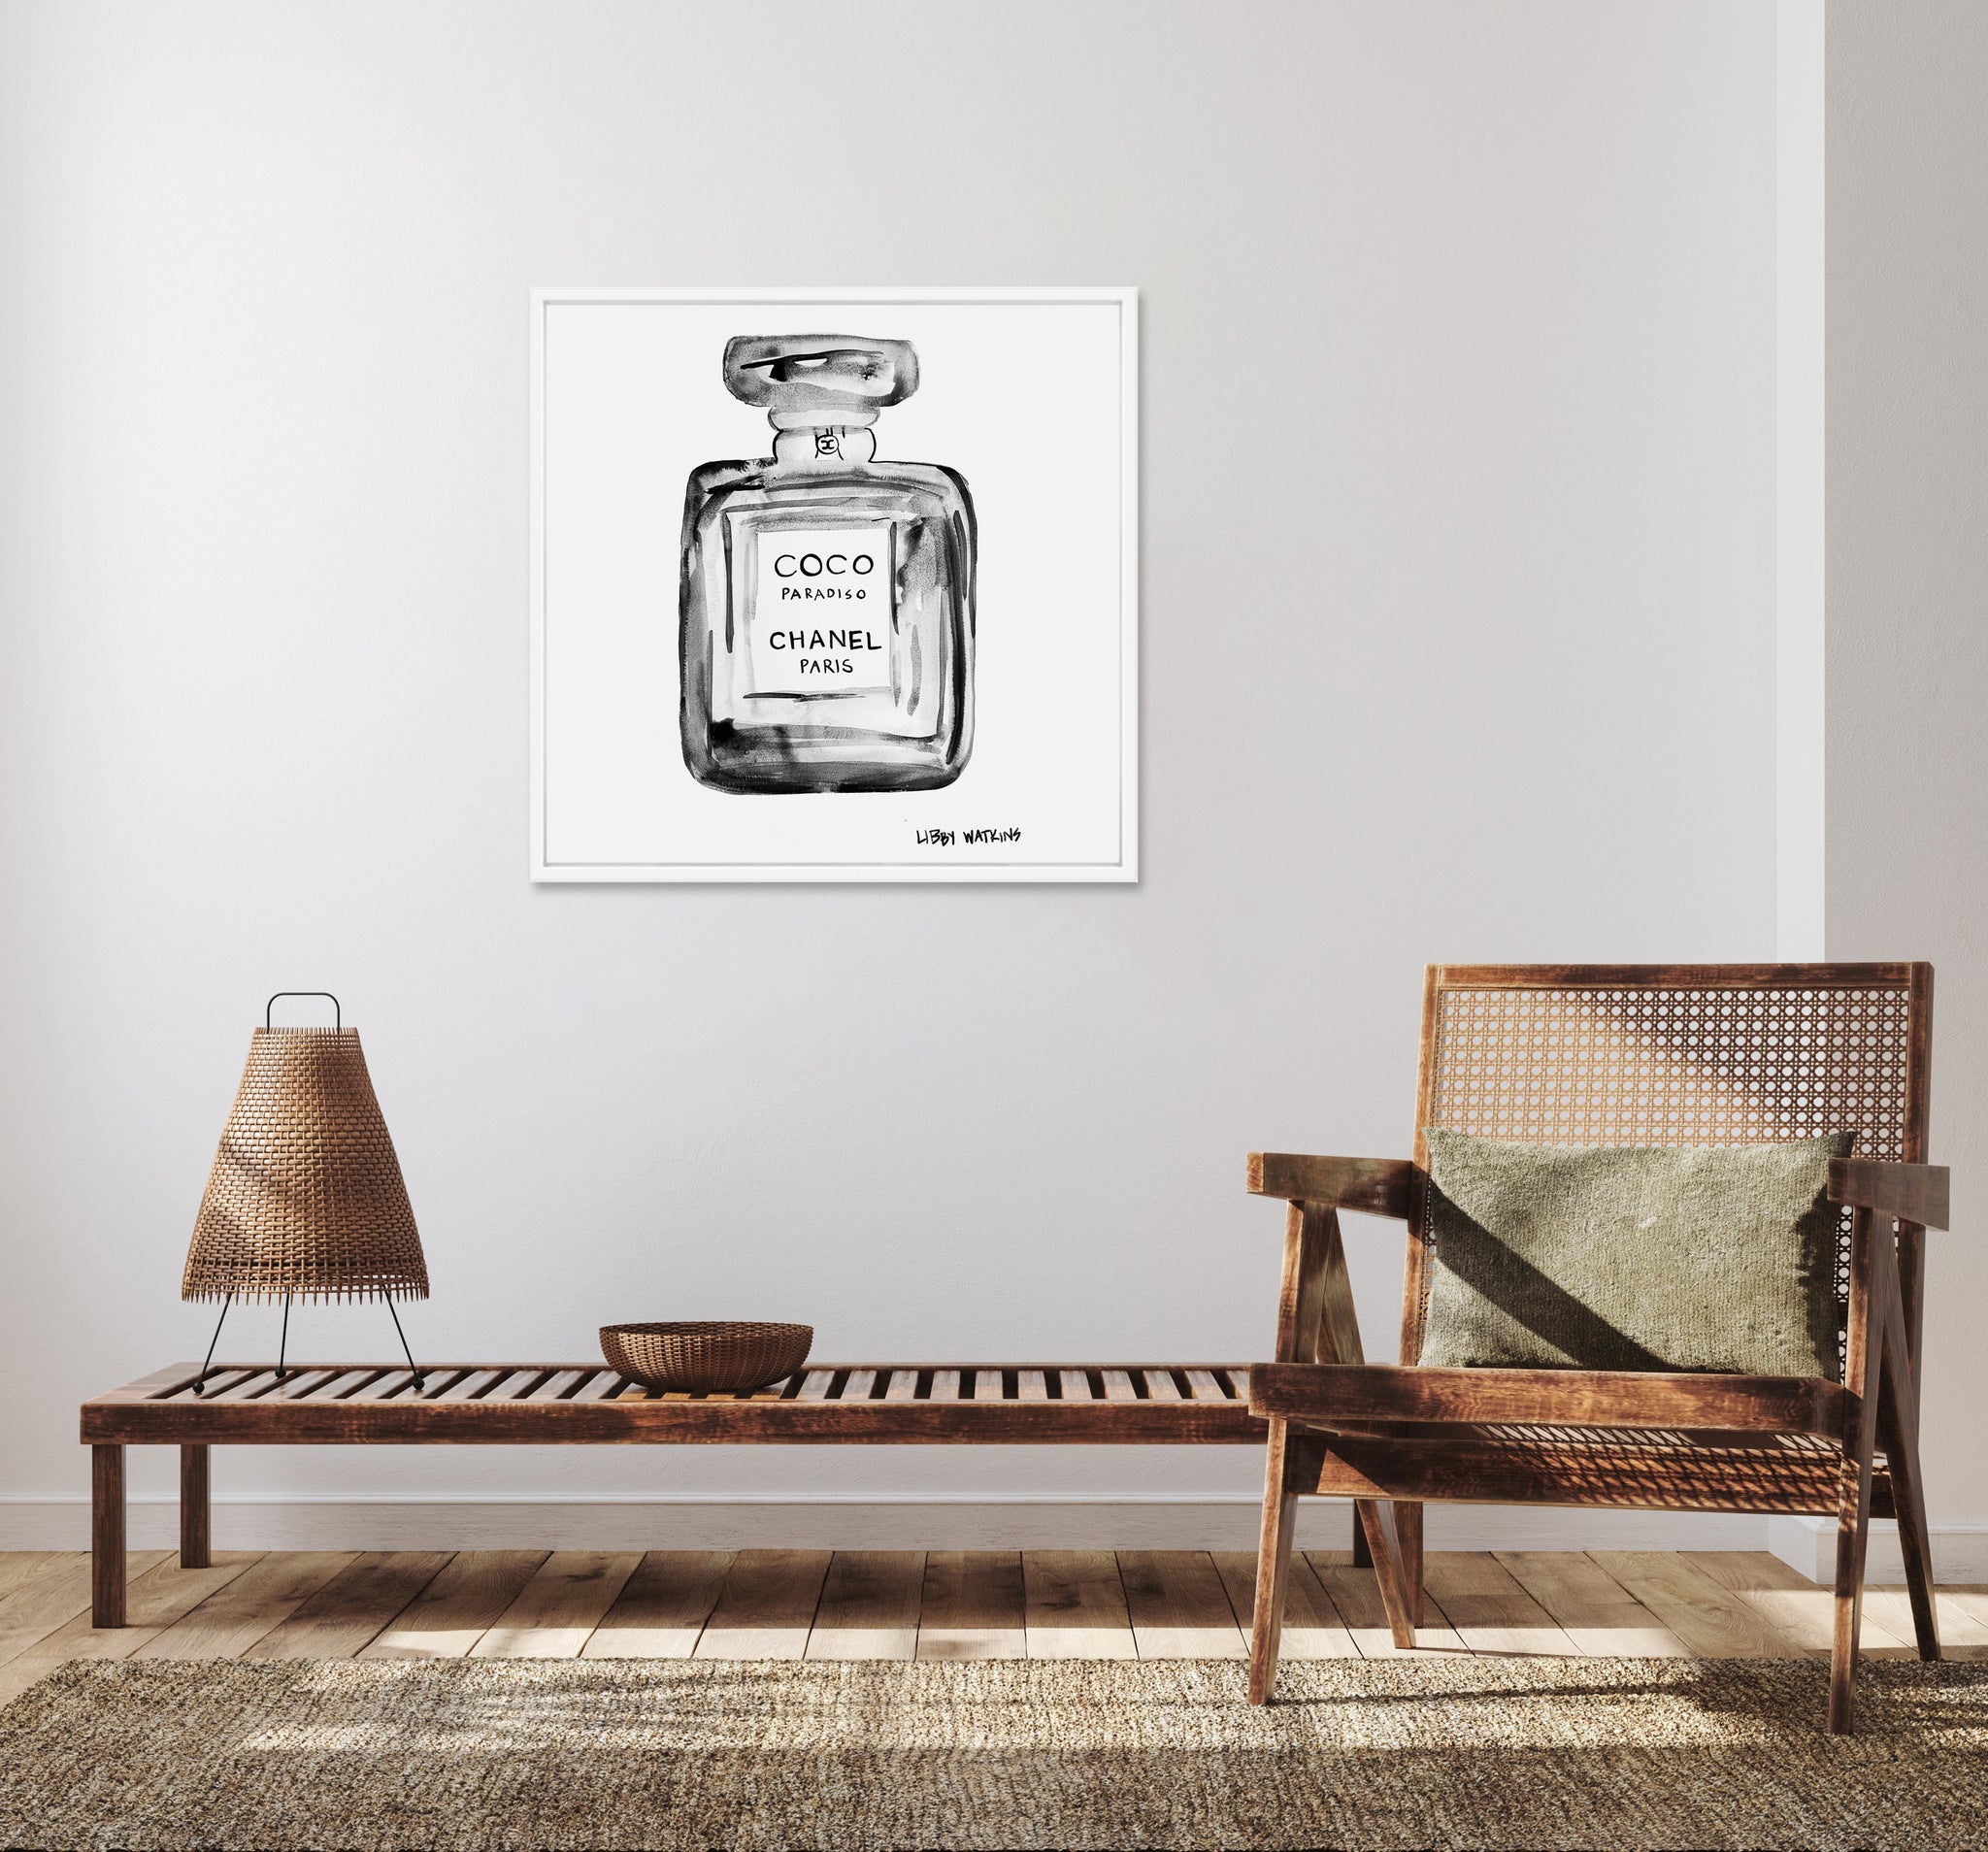 Chanel Coco Paradiso Ink Palm Canvas Print